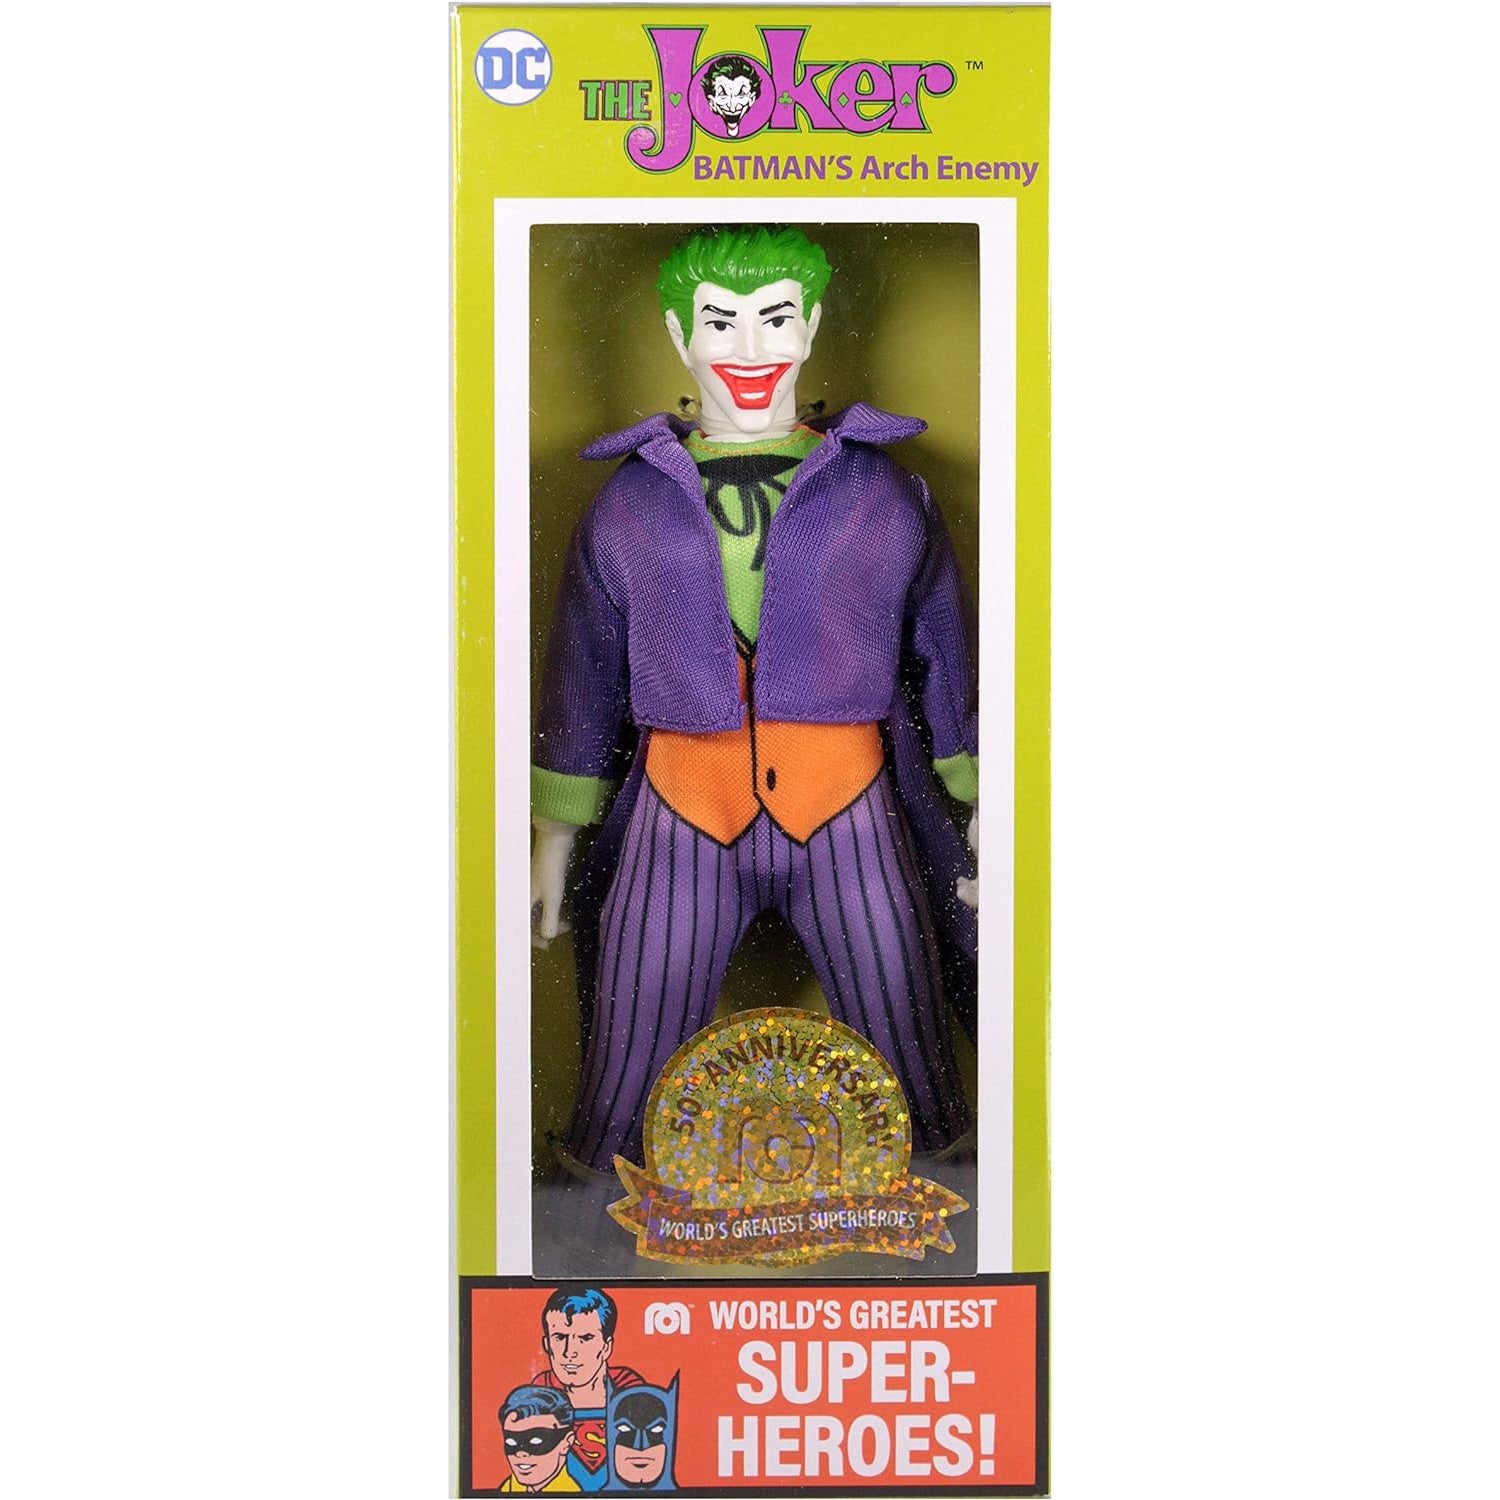 Mego DC The Joker 50th Anniversary 8" Action Figure